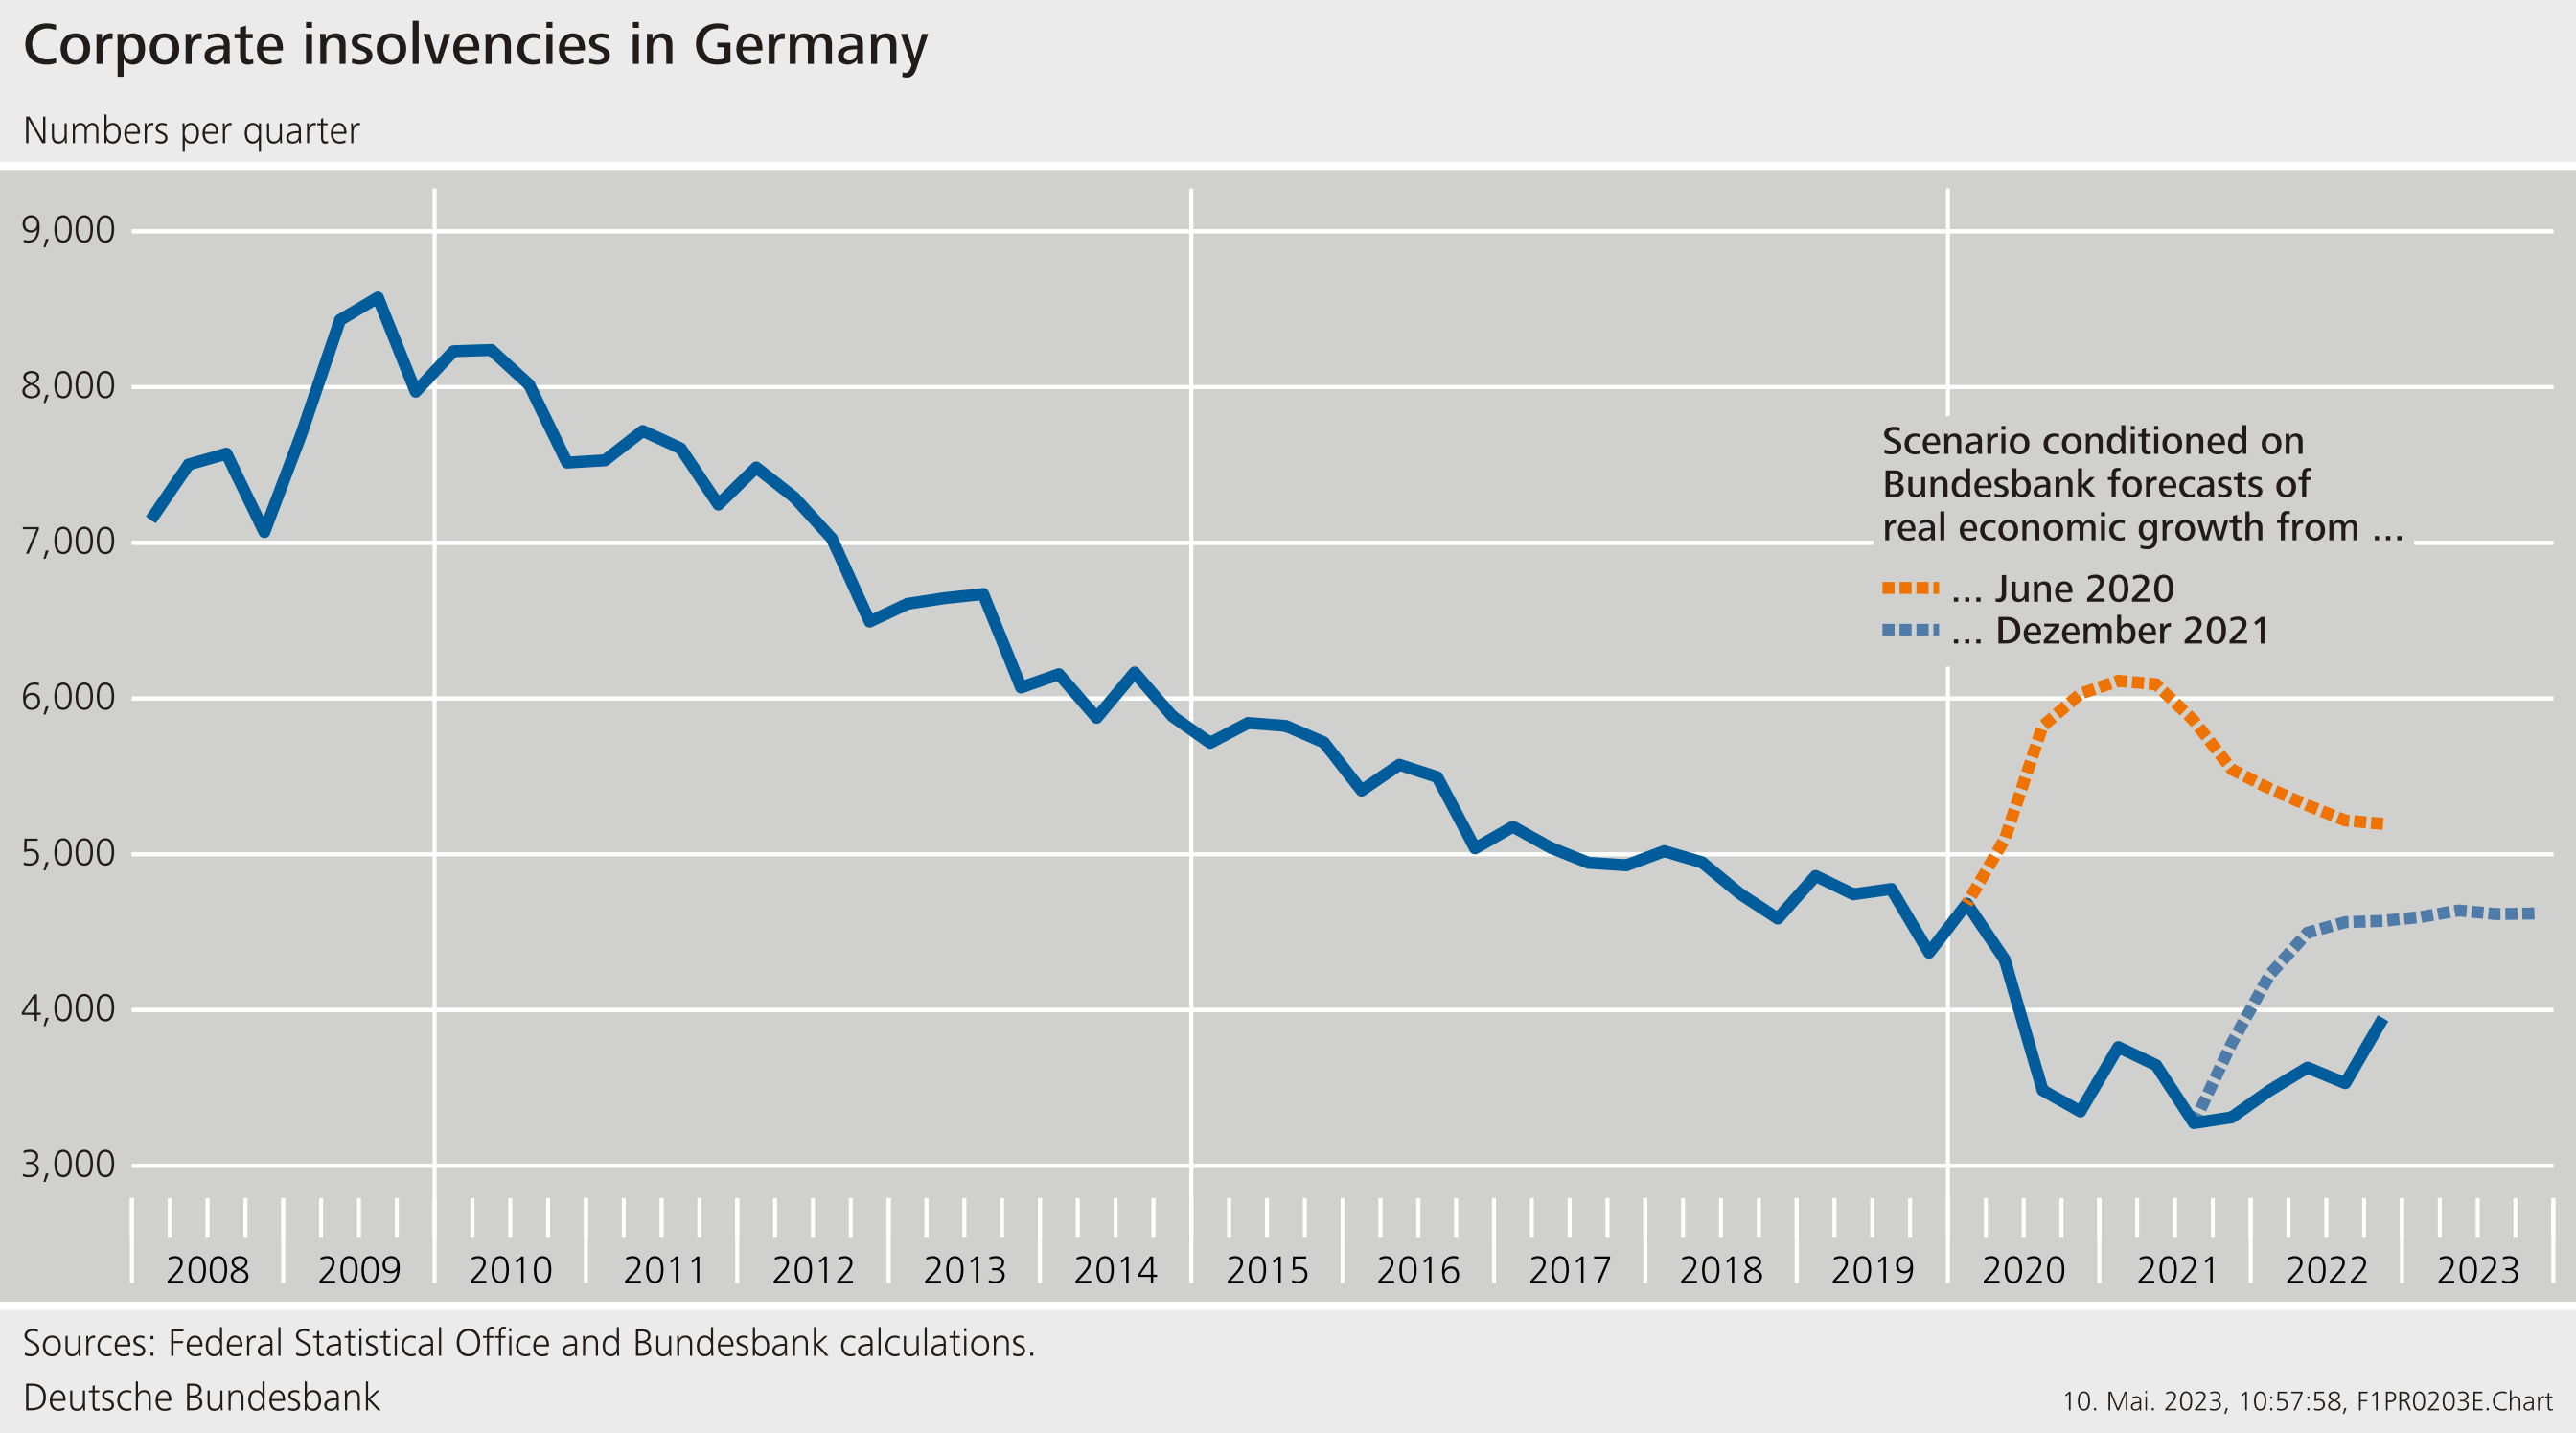 Figure 2: Corporate insolvencies in Germany